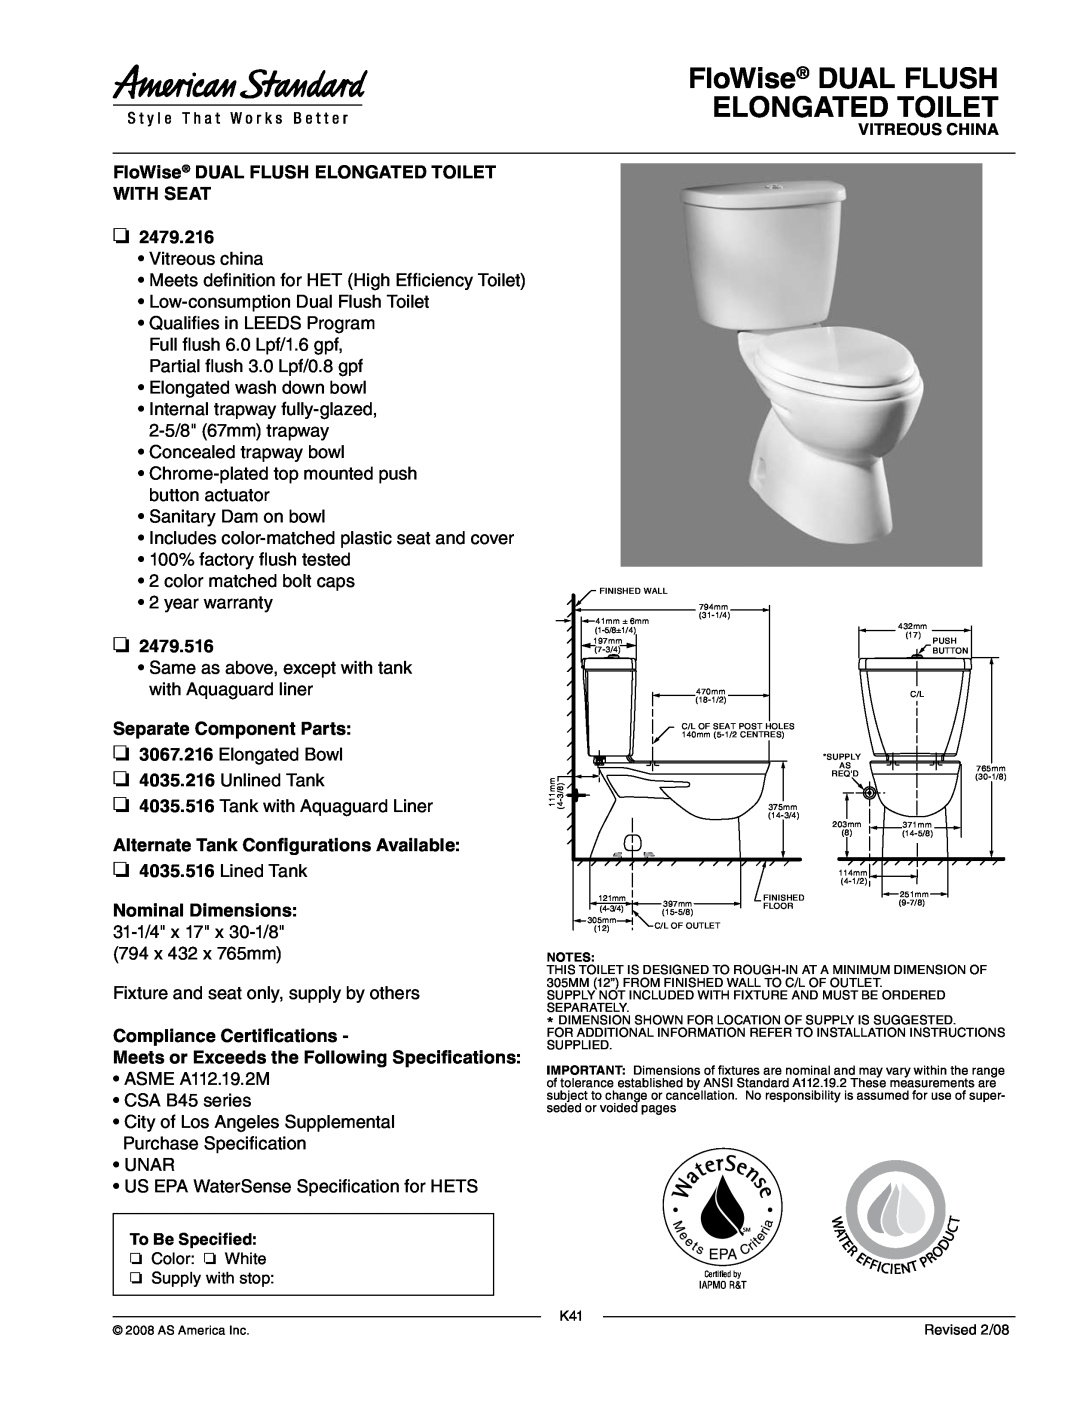 American Standard 3067.216 warranty FloWise DUAL FLUSH ELONGATED TOILET WITH SEAT, 2479.216, 2479.516 